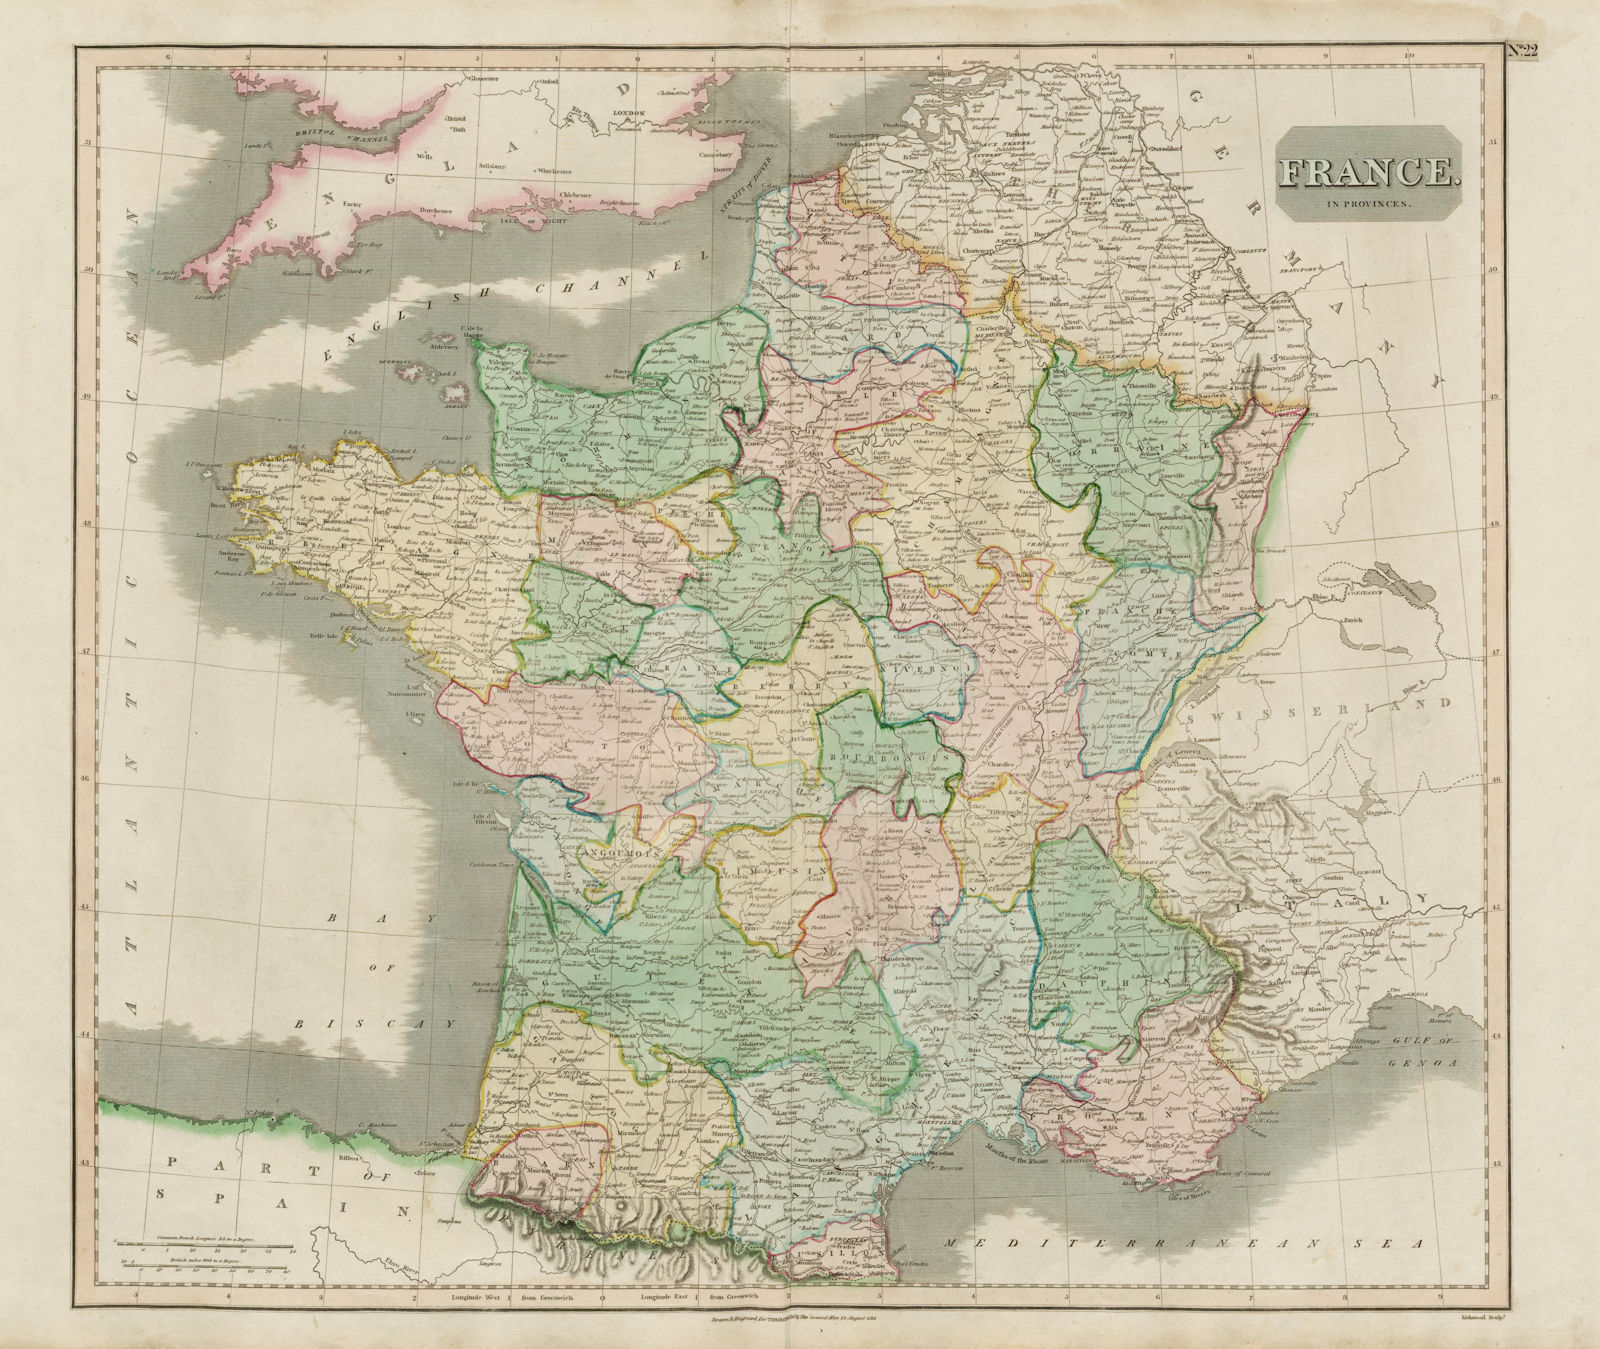 Associate Product "France in provinces", before the Revolution, w/o Savoy & Nice. THOMSON 1817 map